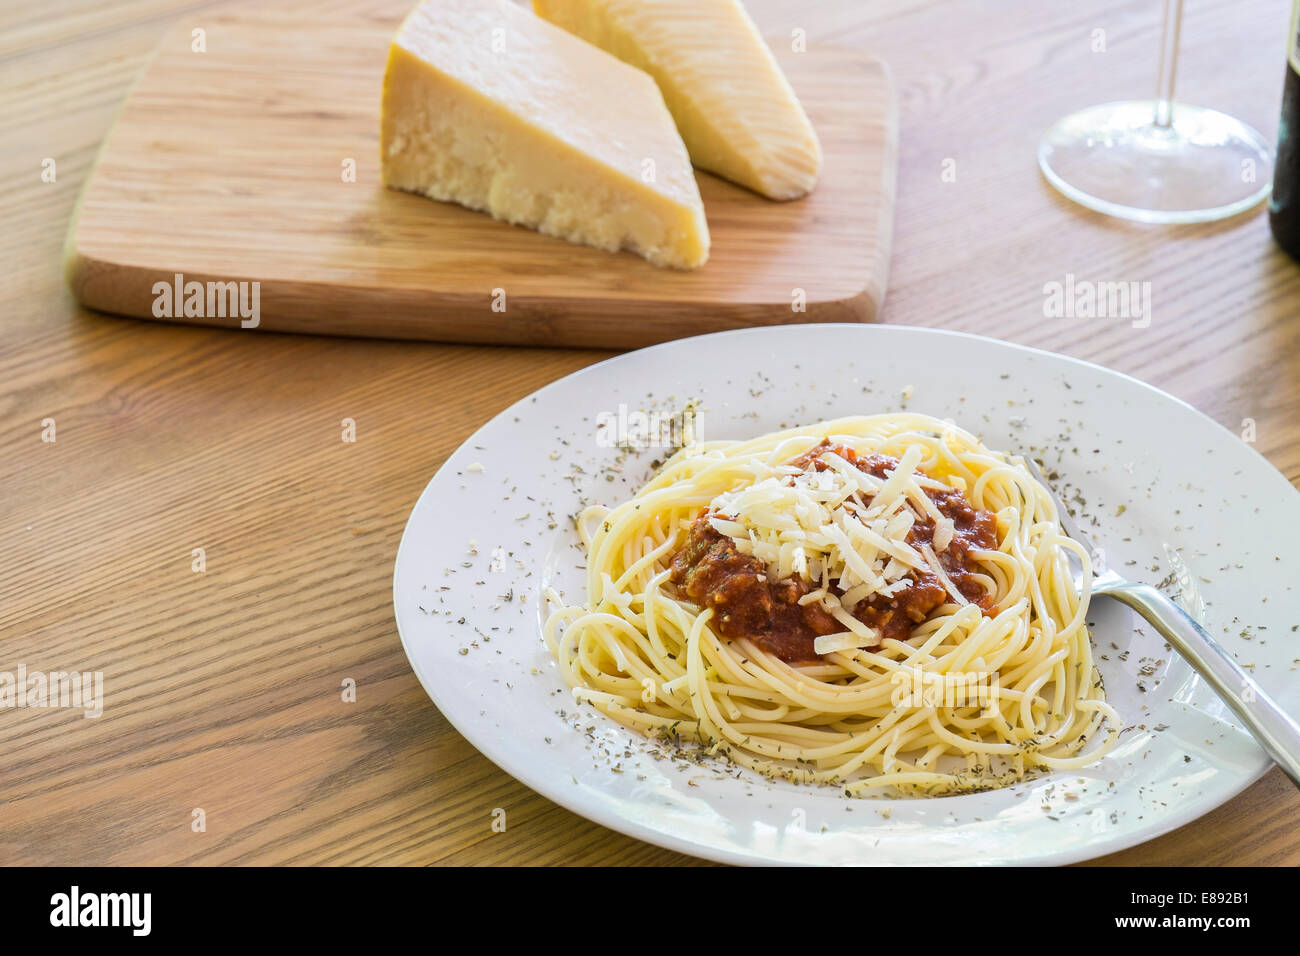 Spaghetti Pasta with red sauce and parmesan on wooden table Stock Photo